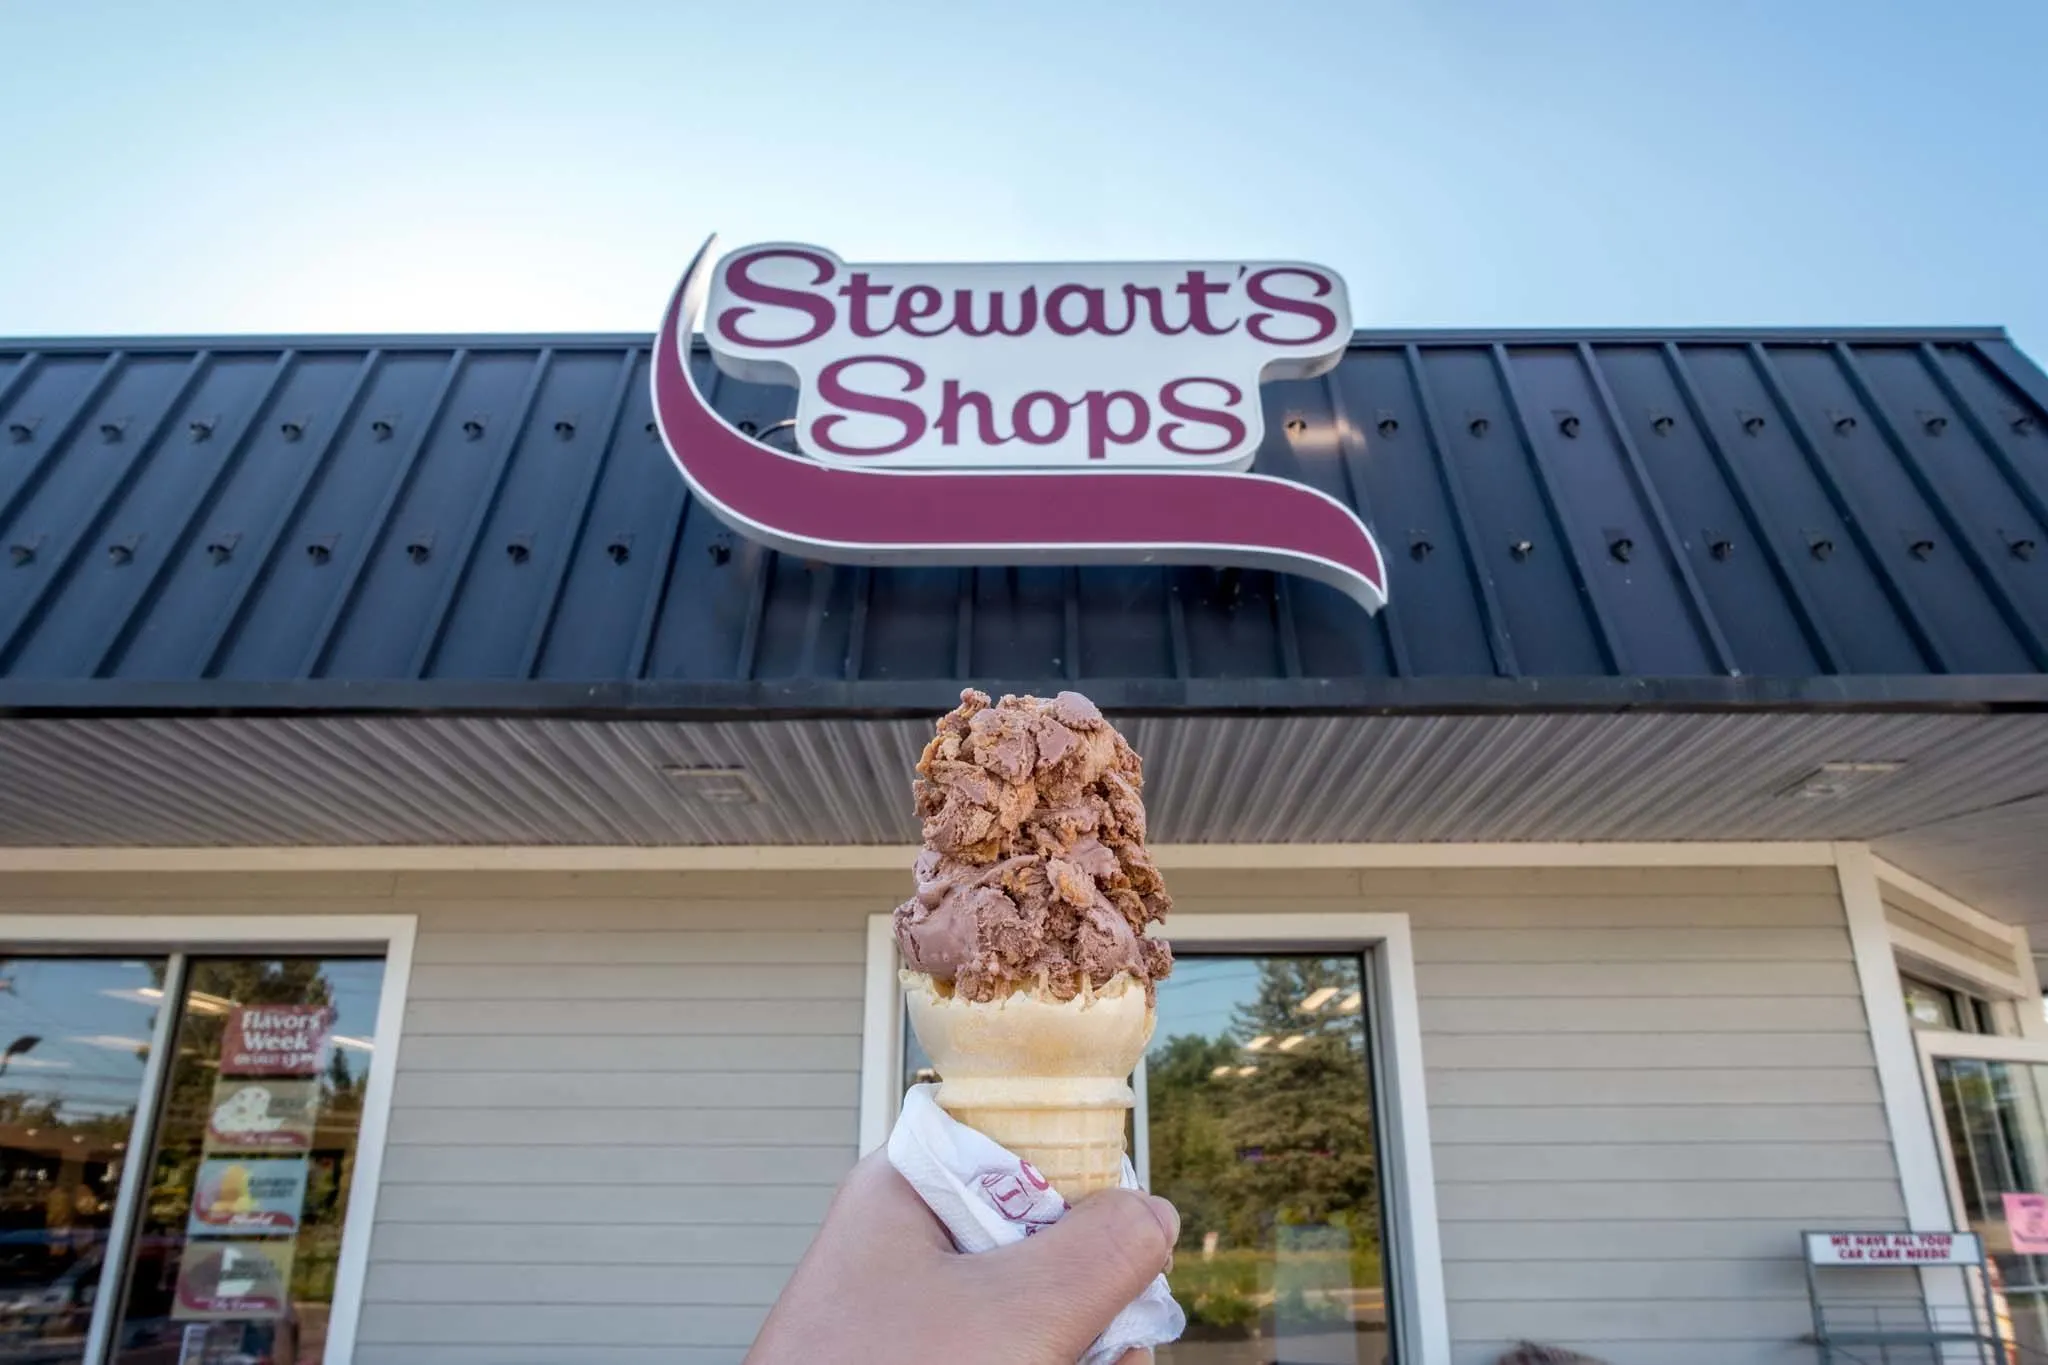 Ice cream cone in front of "Stewart's Shops" sign